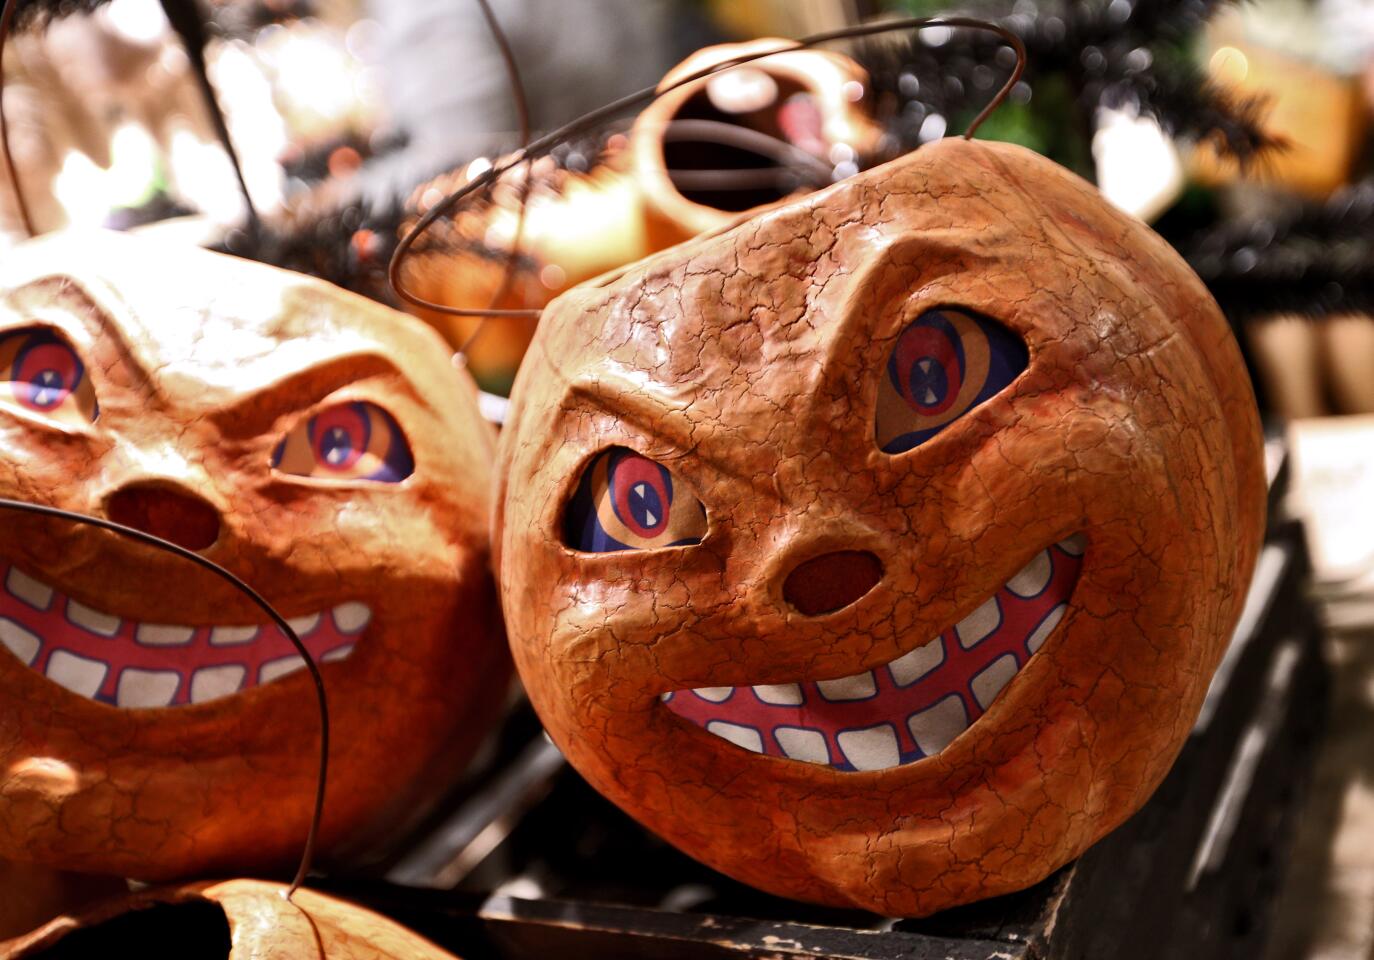 Chuckling pumpkins are on display at Roger’s Gardens for the "Malice in Wonderland" Halloween boutique.